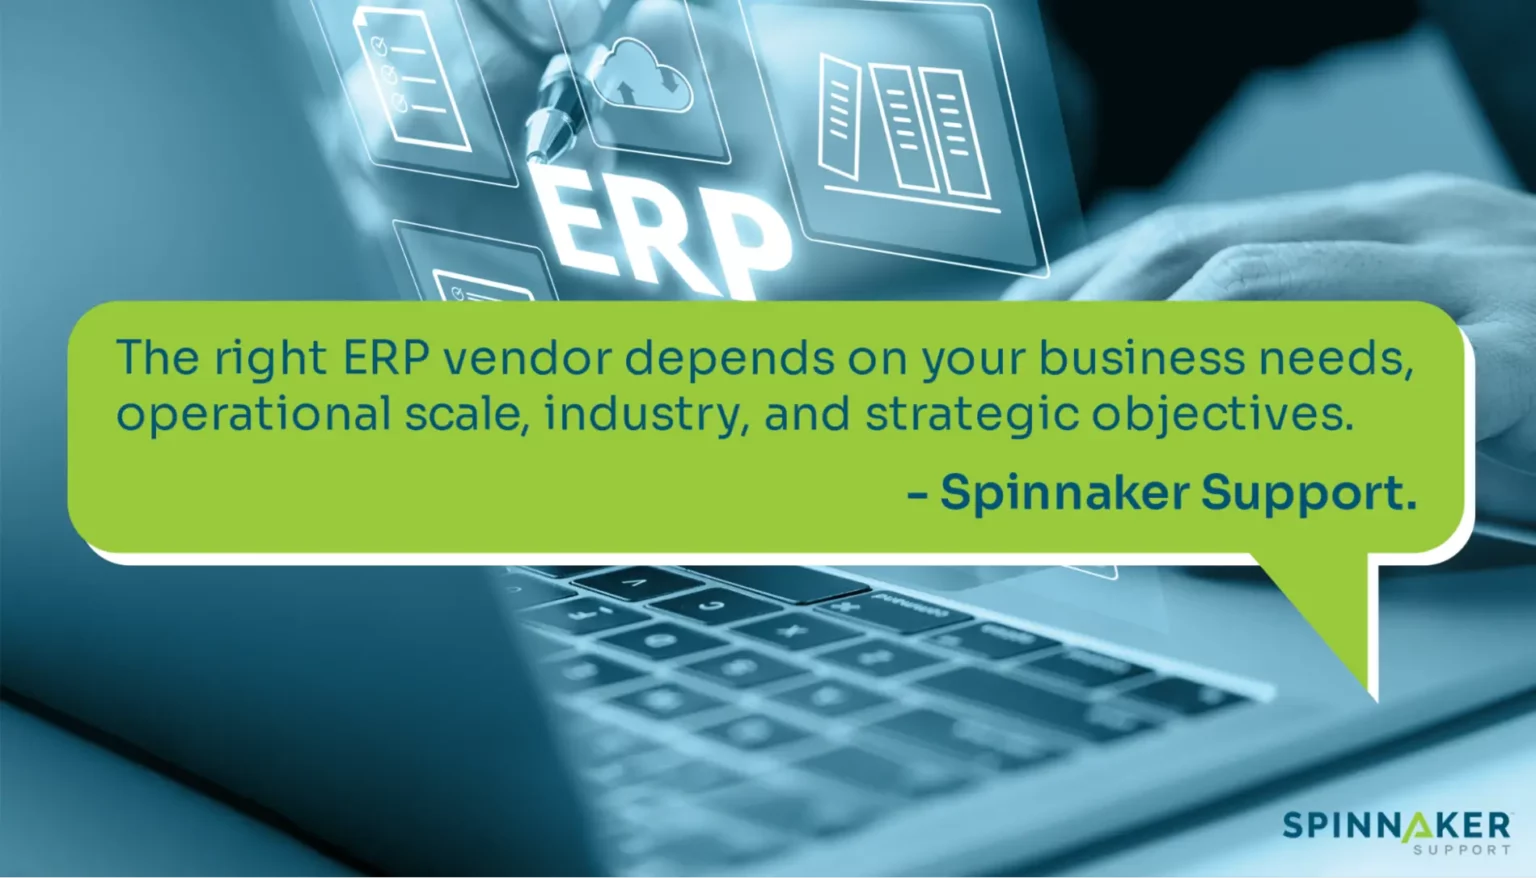 How to choose the right ERP software provider?